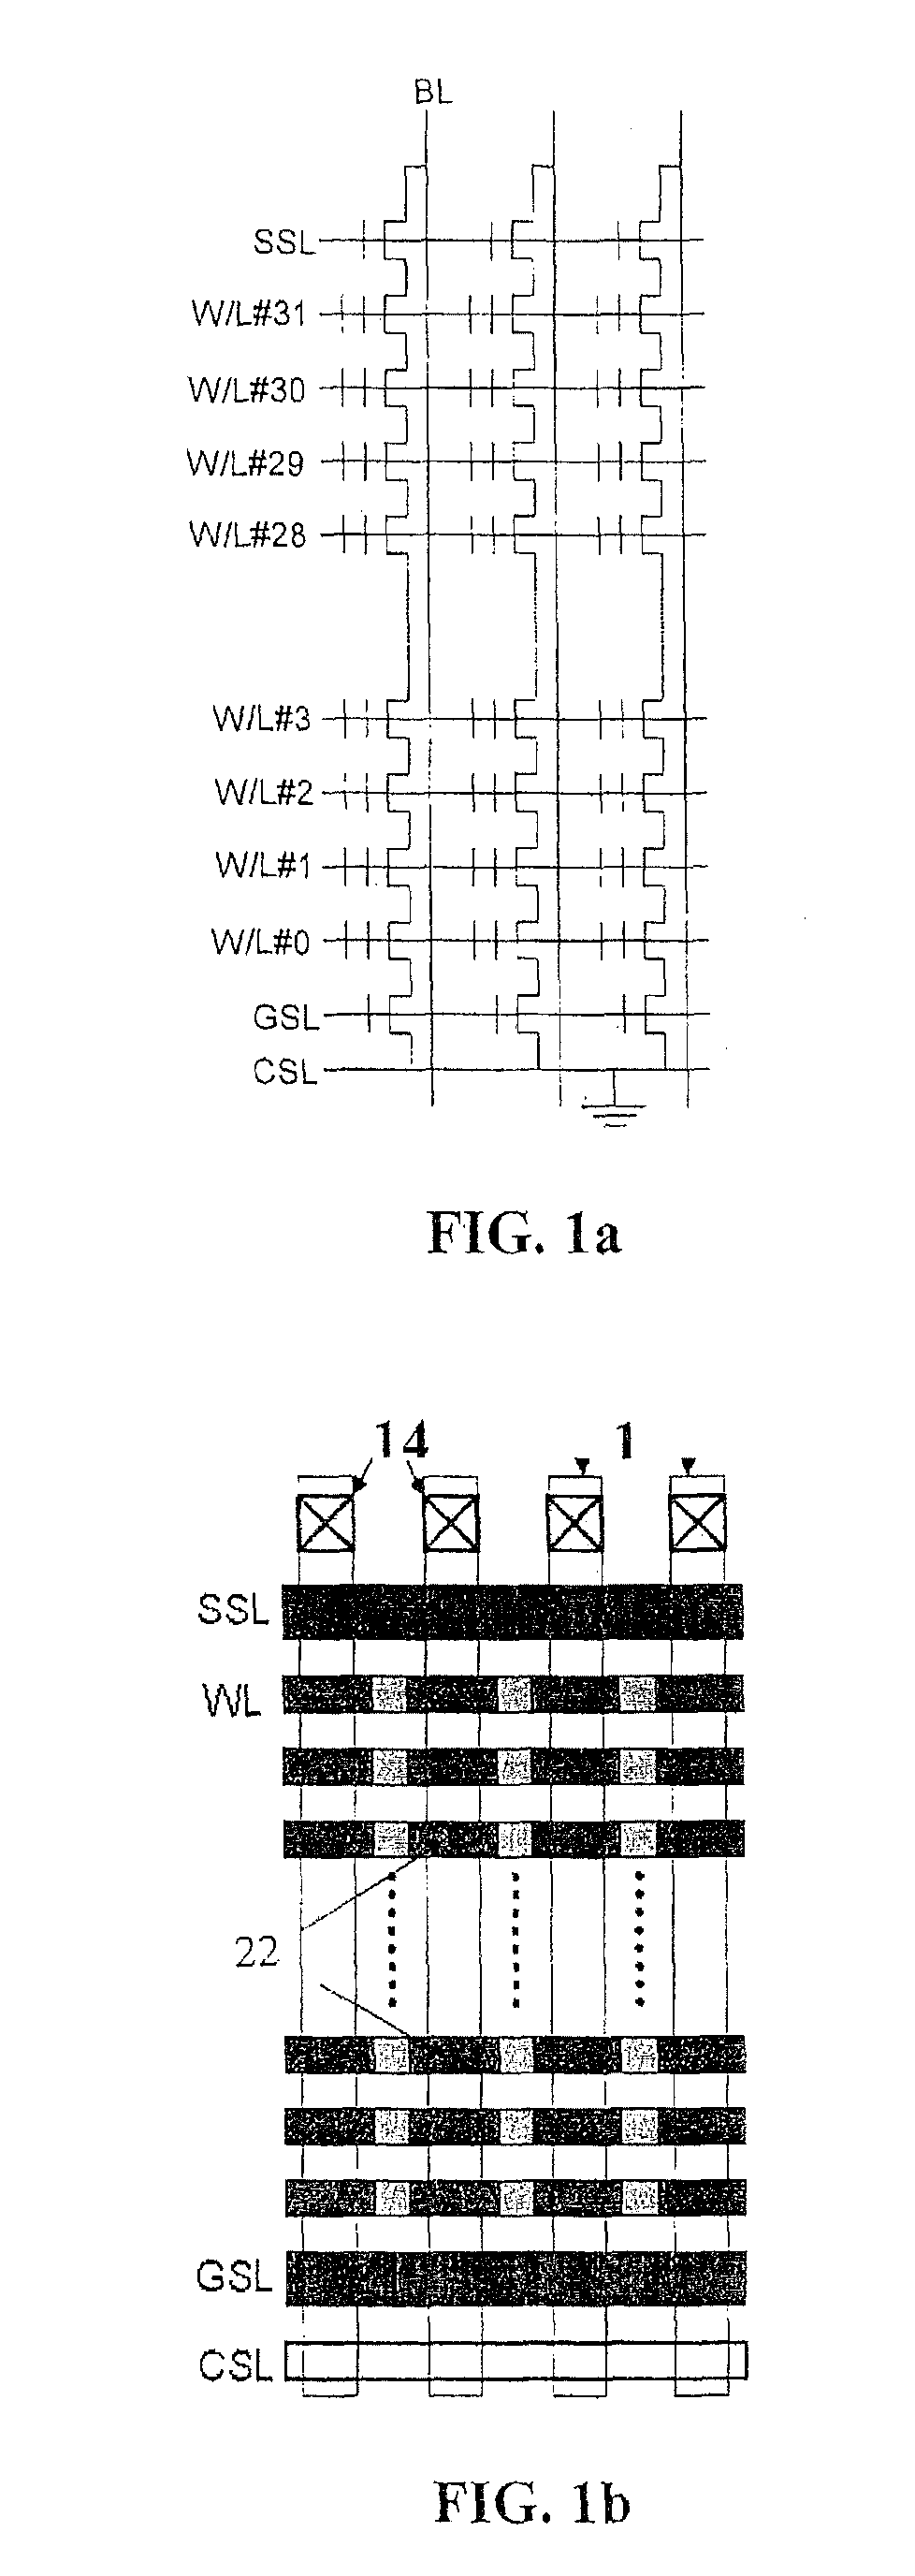 Semiconductor devices comprising a plurality of gate structures